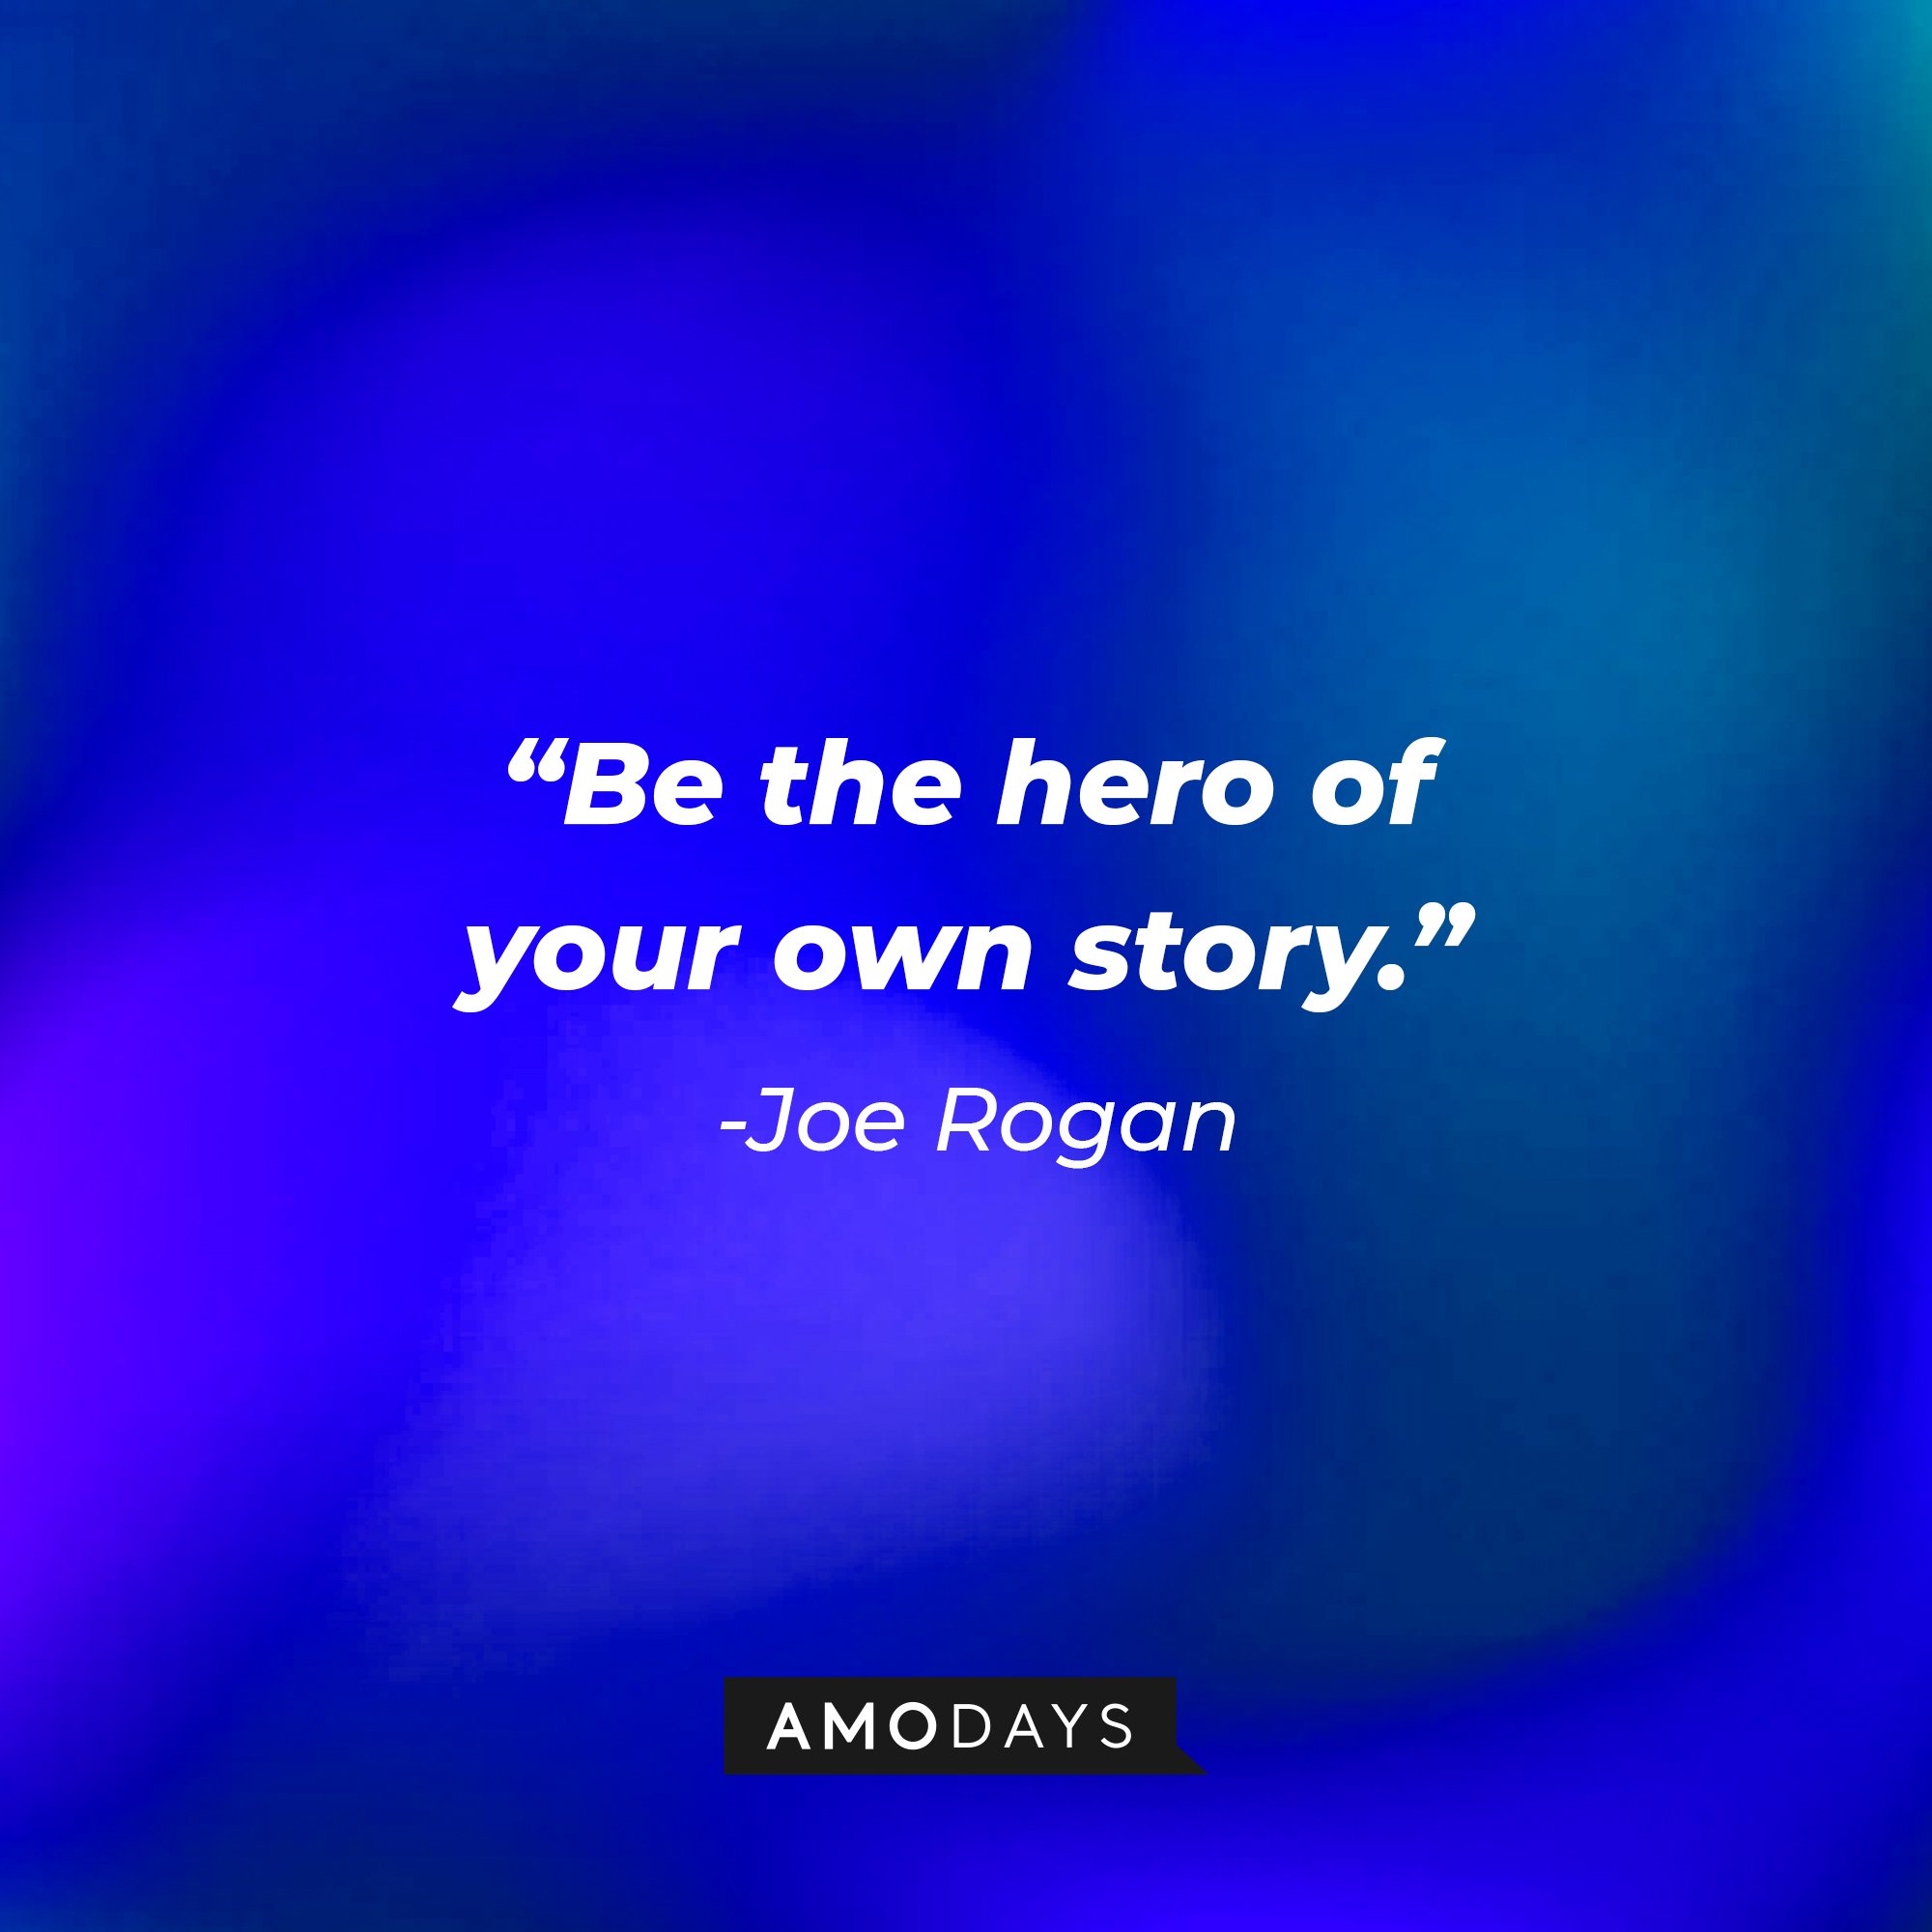 Joe Rogan's quote: "Be the hero of your own story." | Image: AmoDays